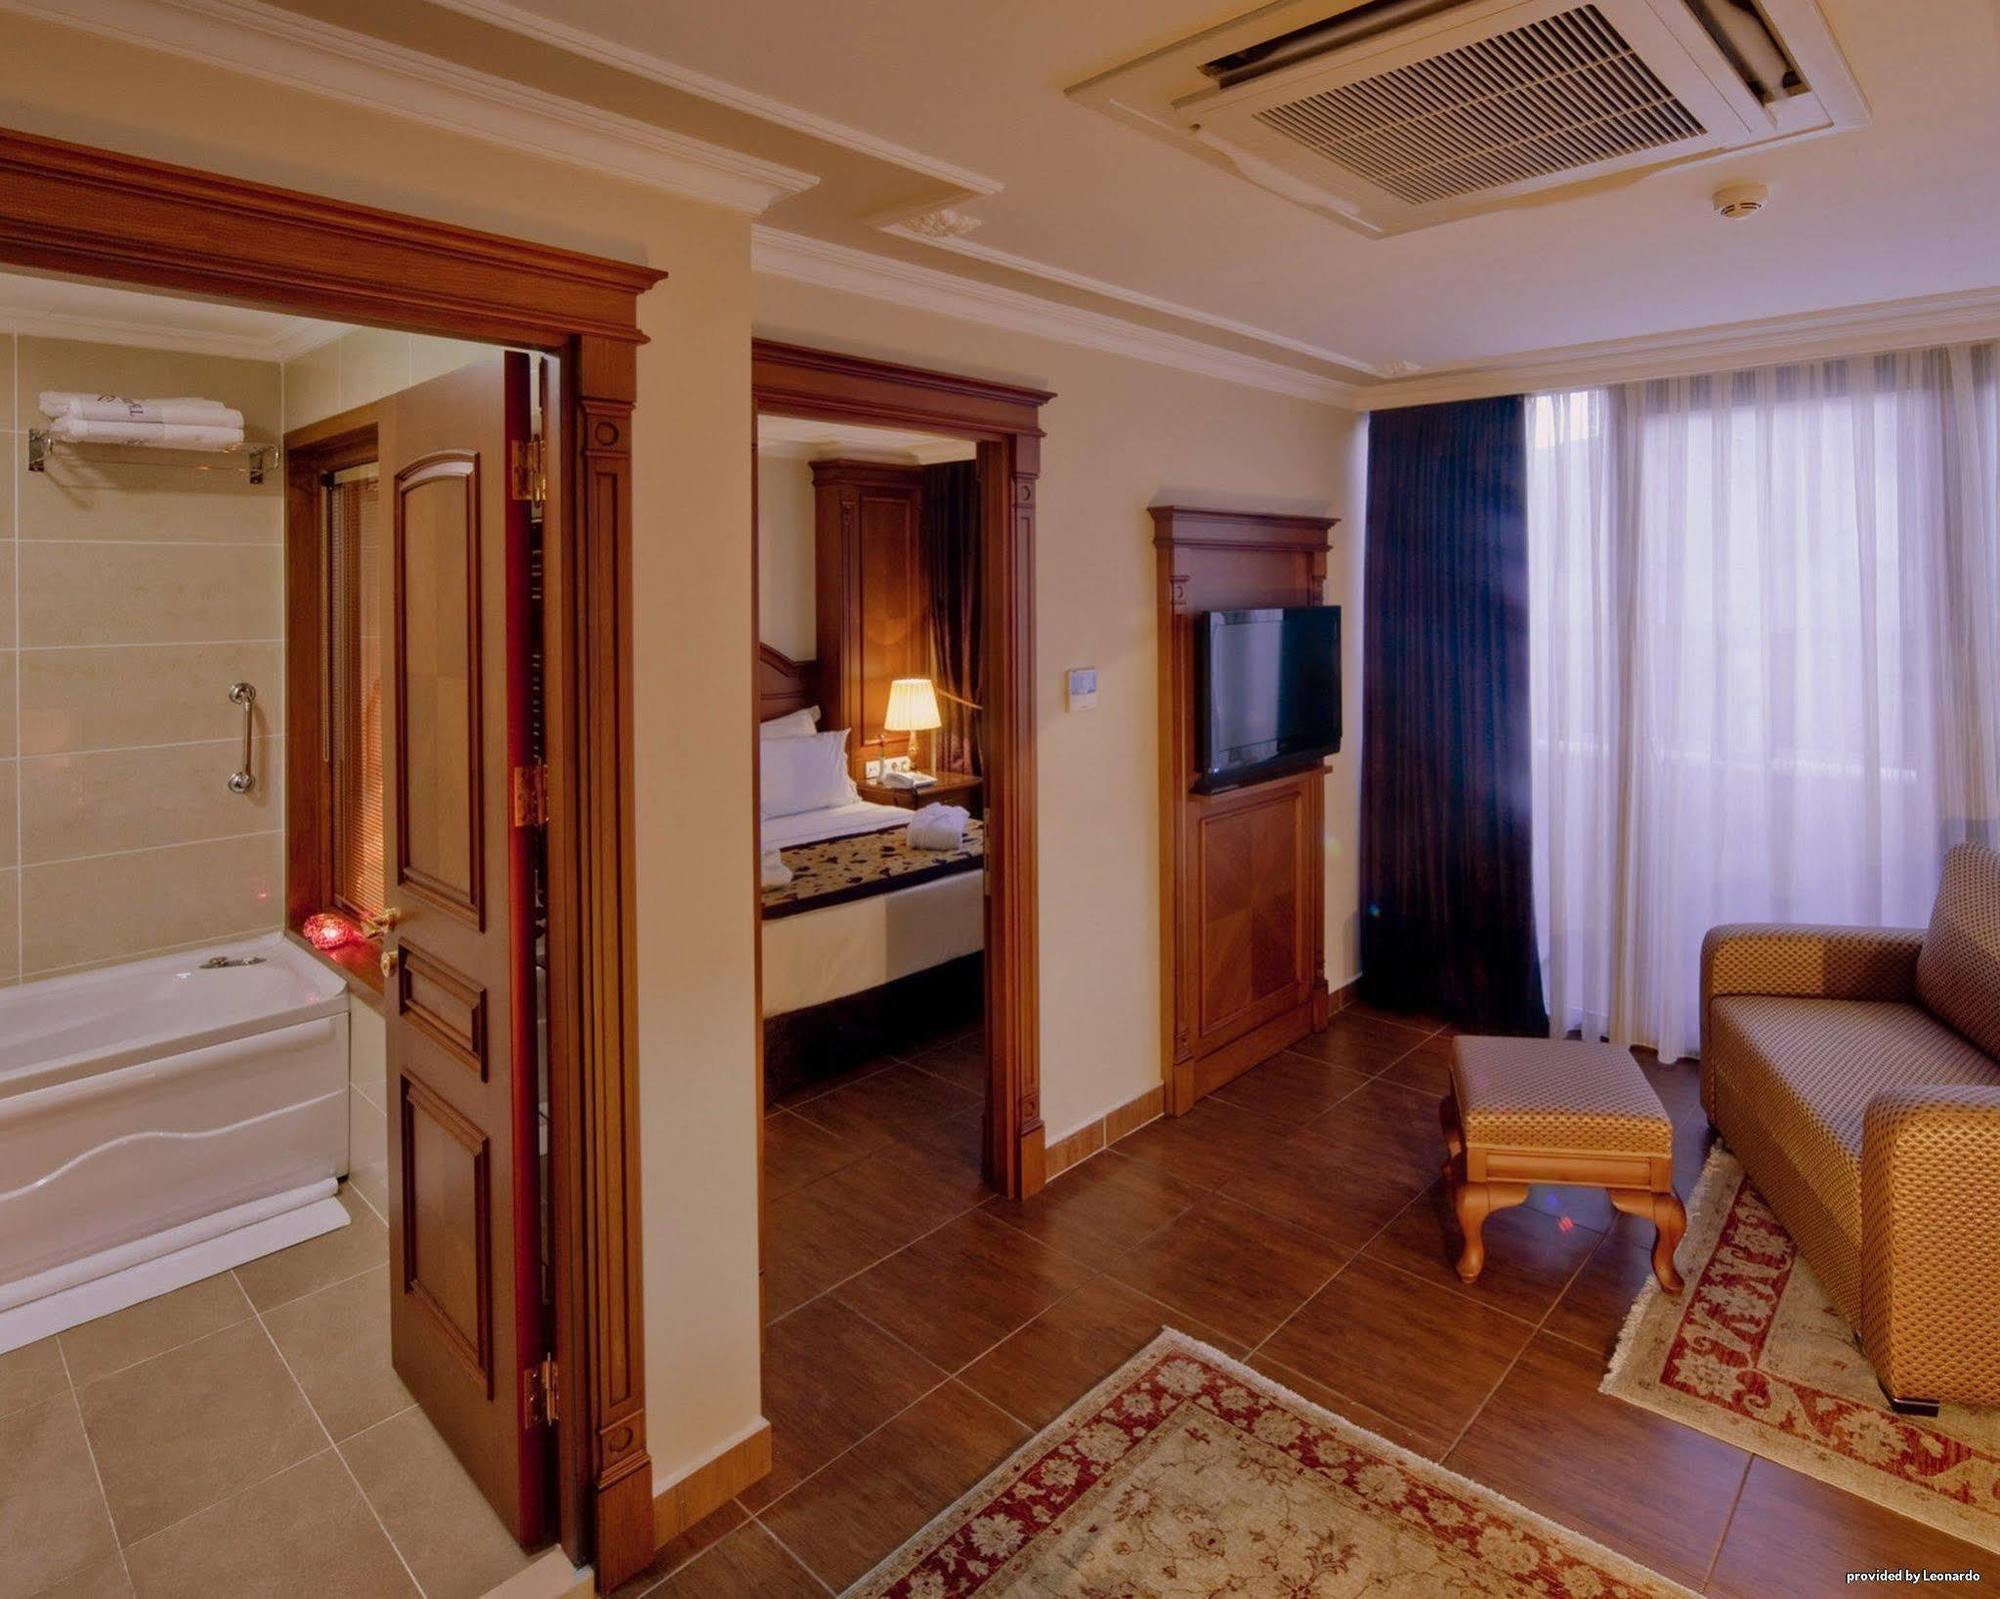 Glk Premier The Home Suites & Spa Istanbul Room photo